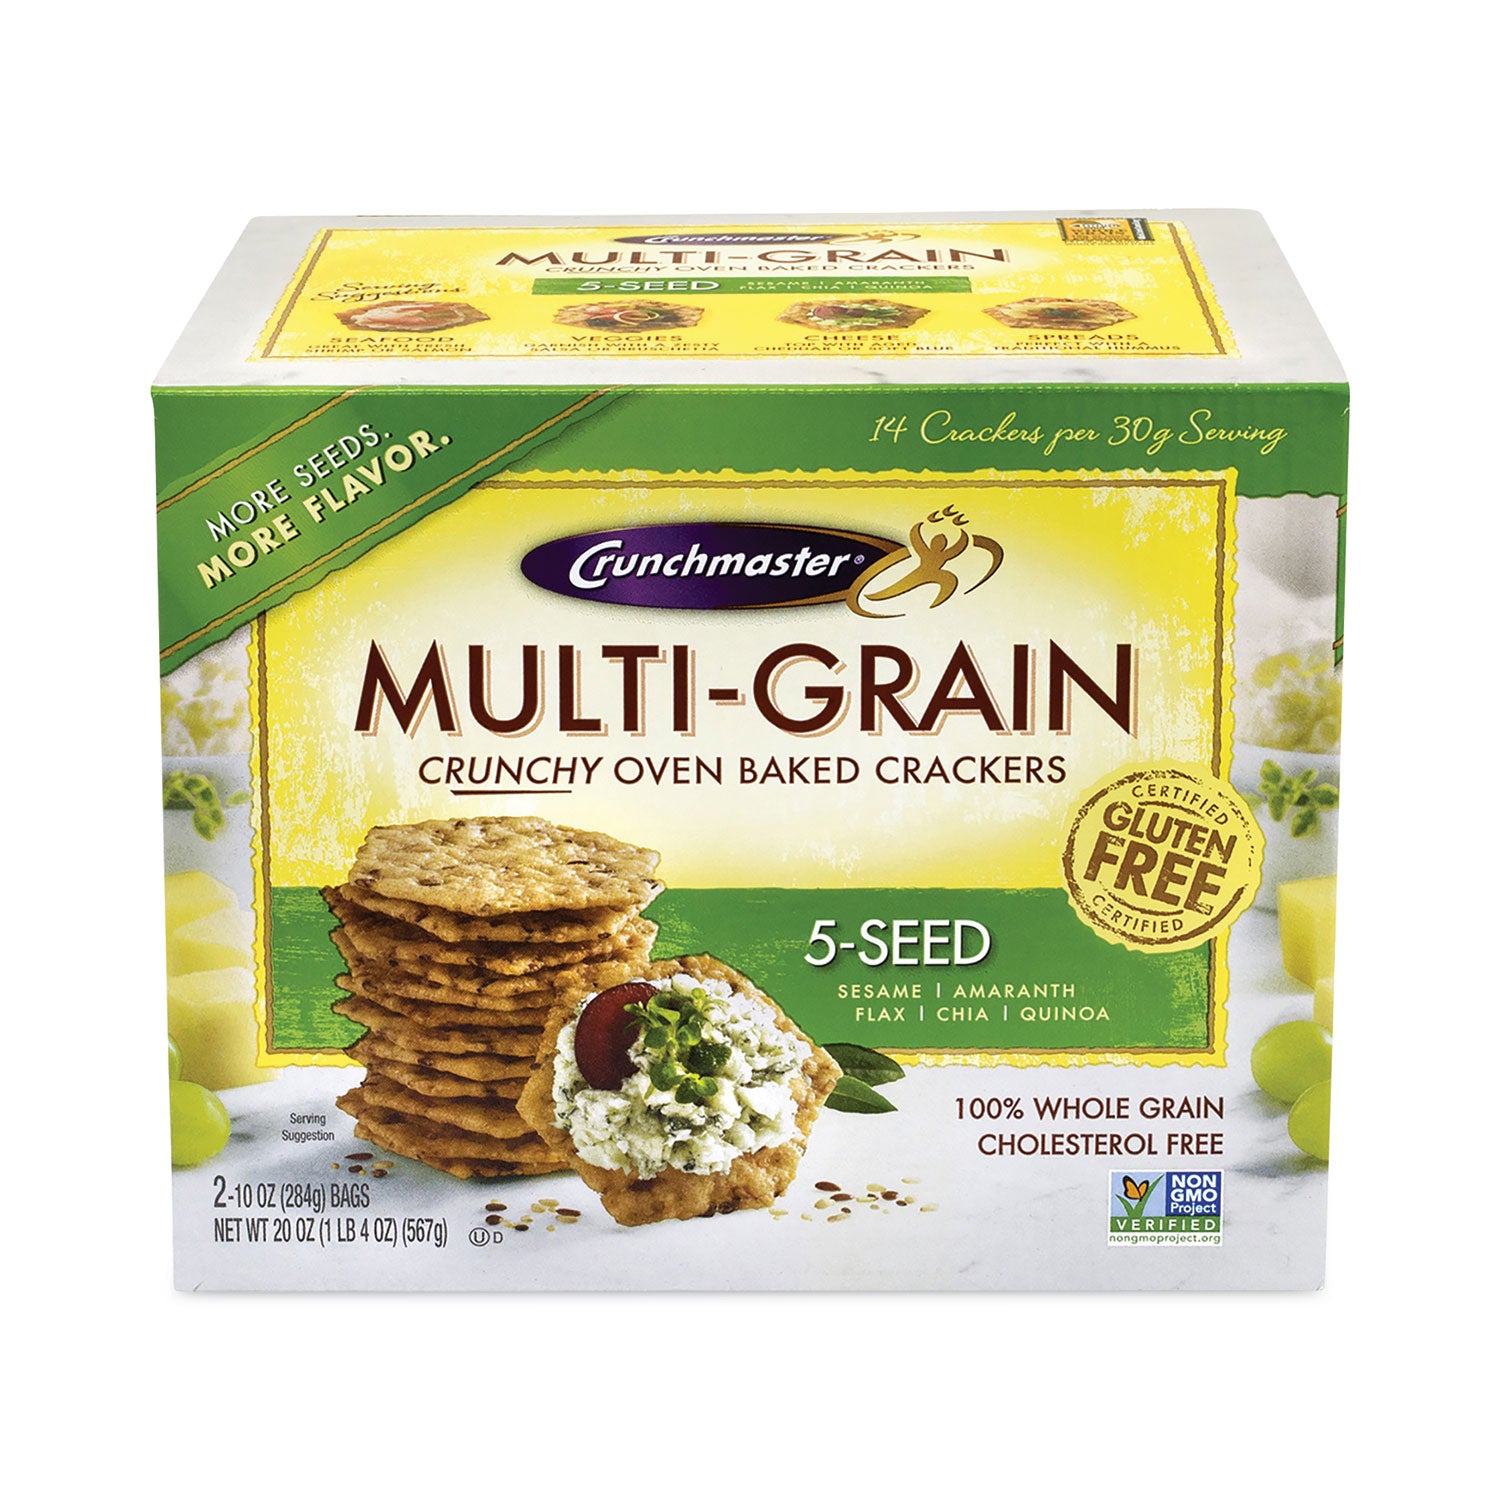 5-seed-multi-grain-crunchy-oven-baked-crackers-whole-wheat-10-oz-bag-2-bags-box-ships-in-1-3-business-days_grr22000757 - 1